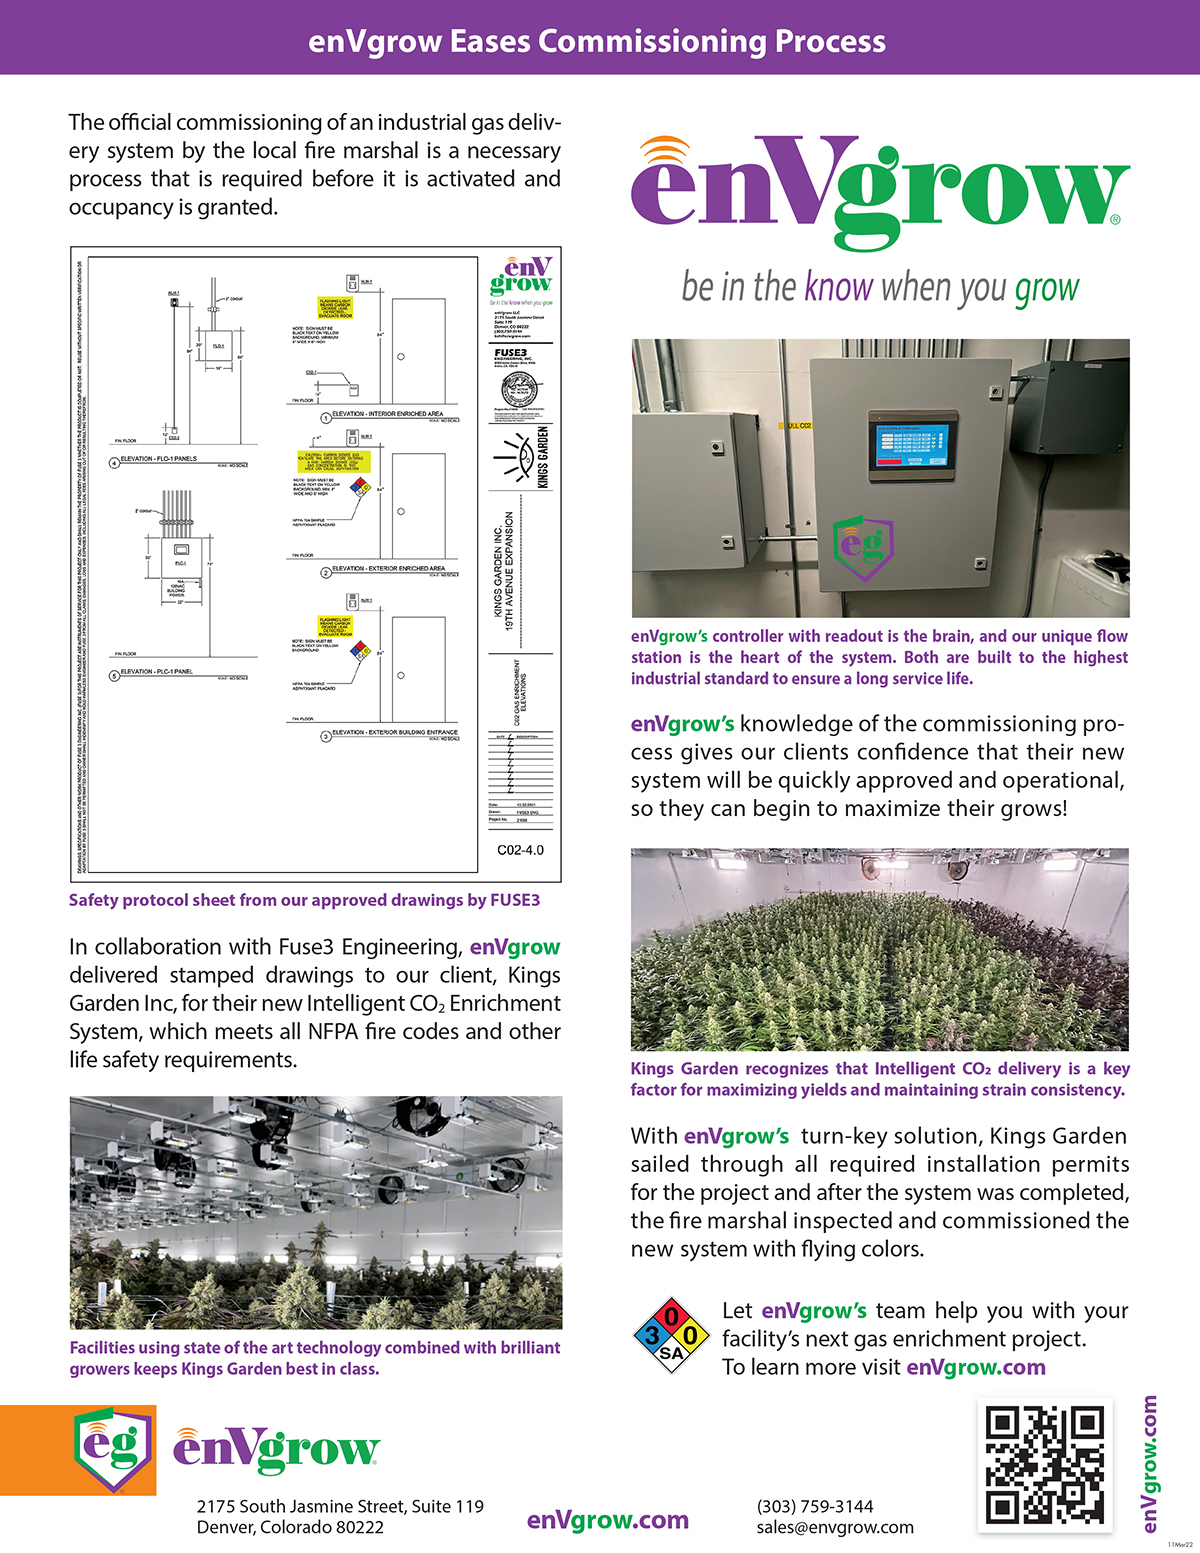 enVgrow Eases Commissioning Process